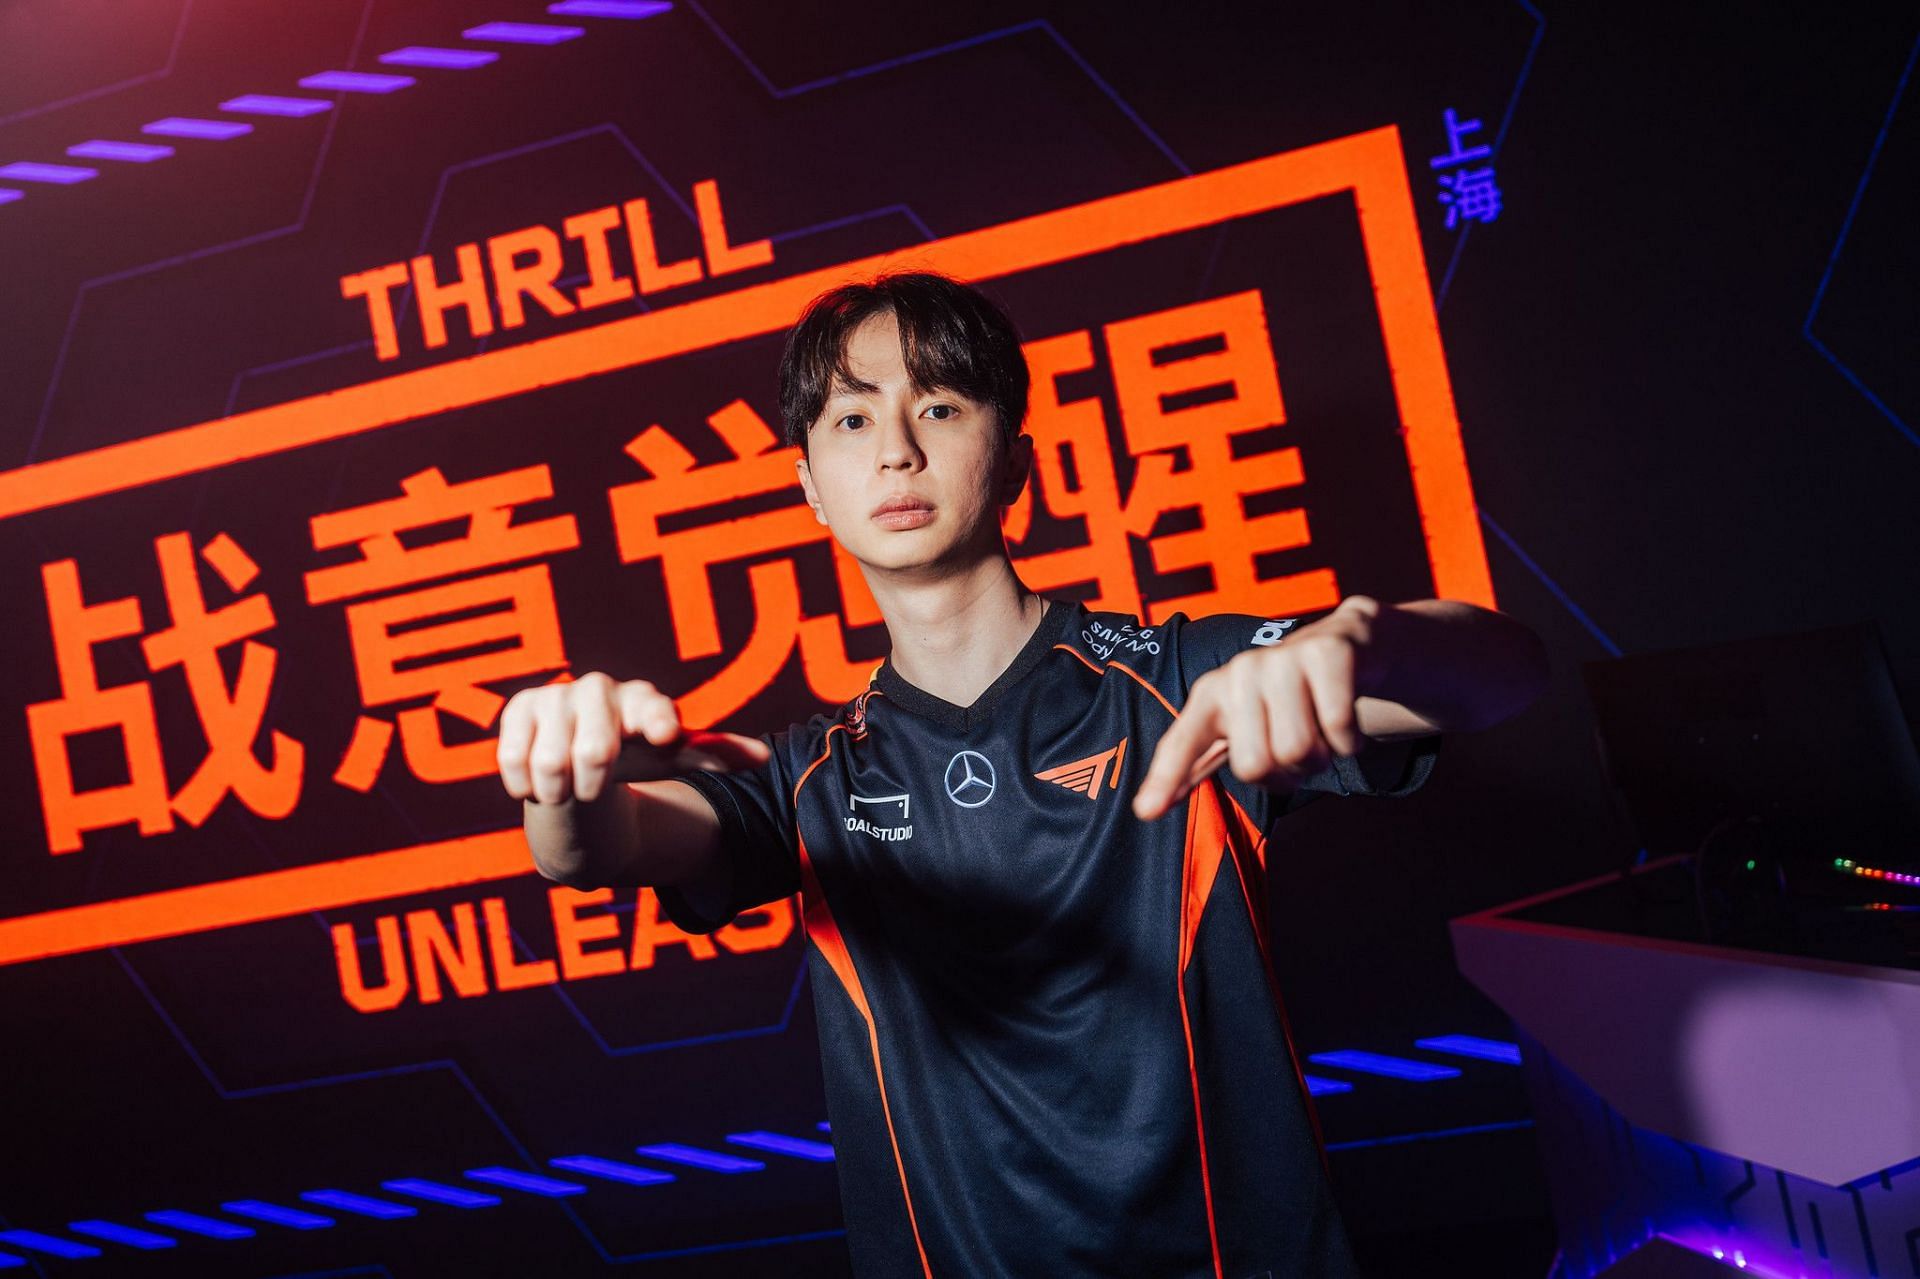 xccurate at VCT Masters Shanghai (Image via Riot Games)